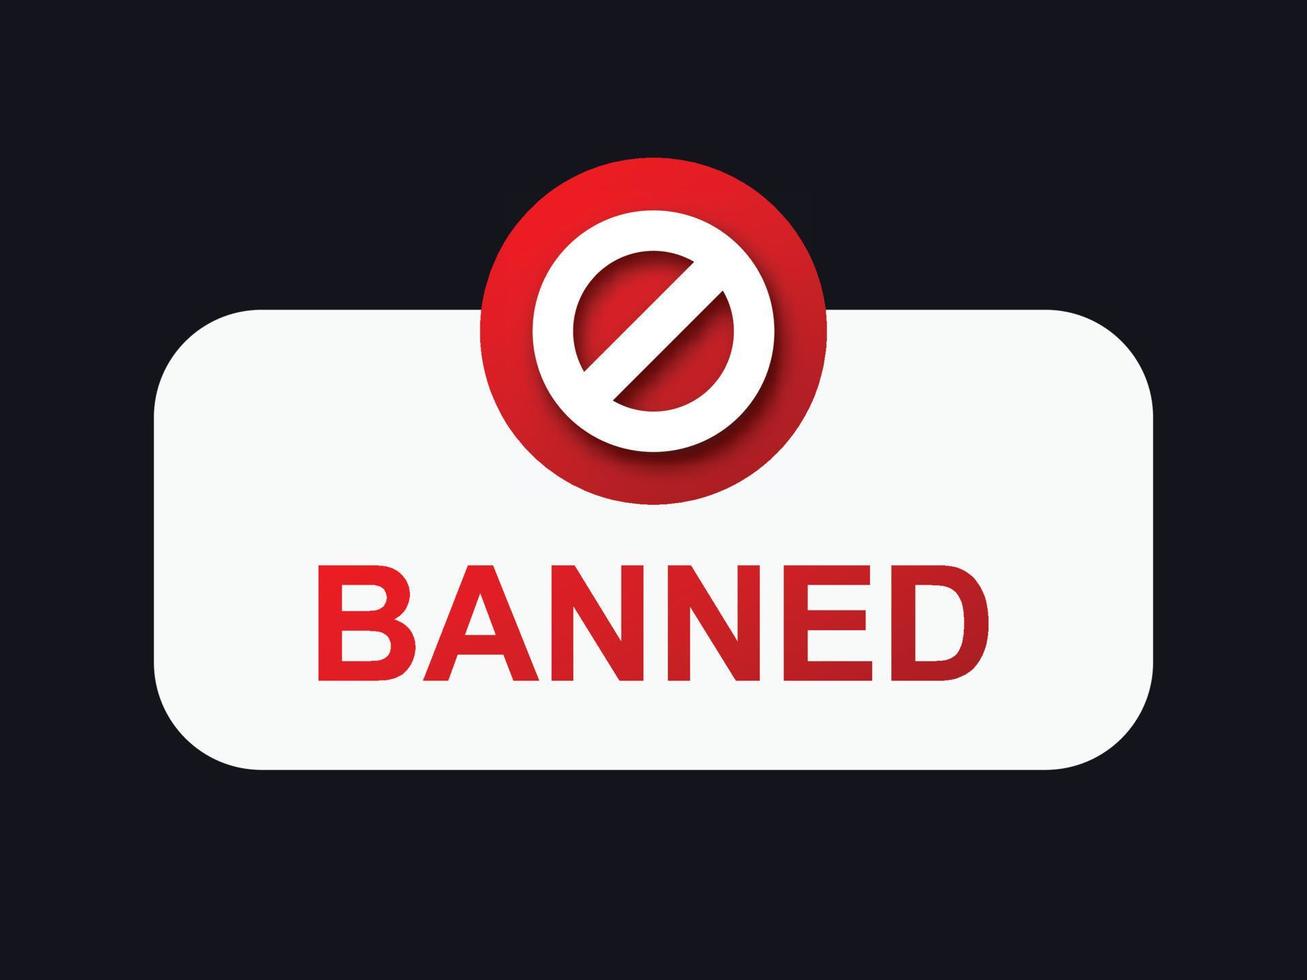 Banned poster. Red sign locked warning about blocking online content deleting user from social network account restricting information web channel banning use negative vector materials.